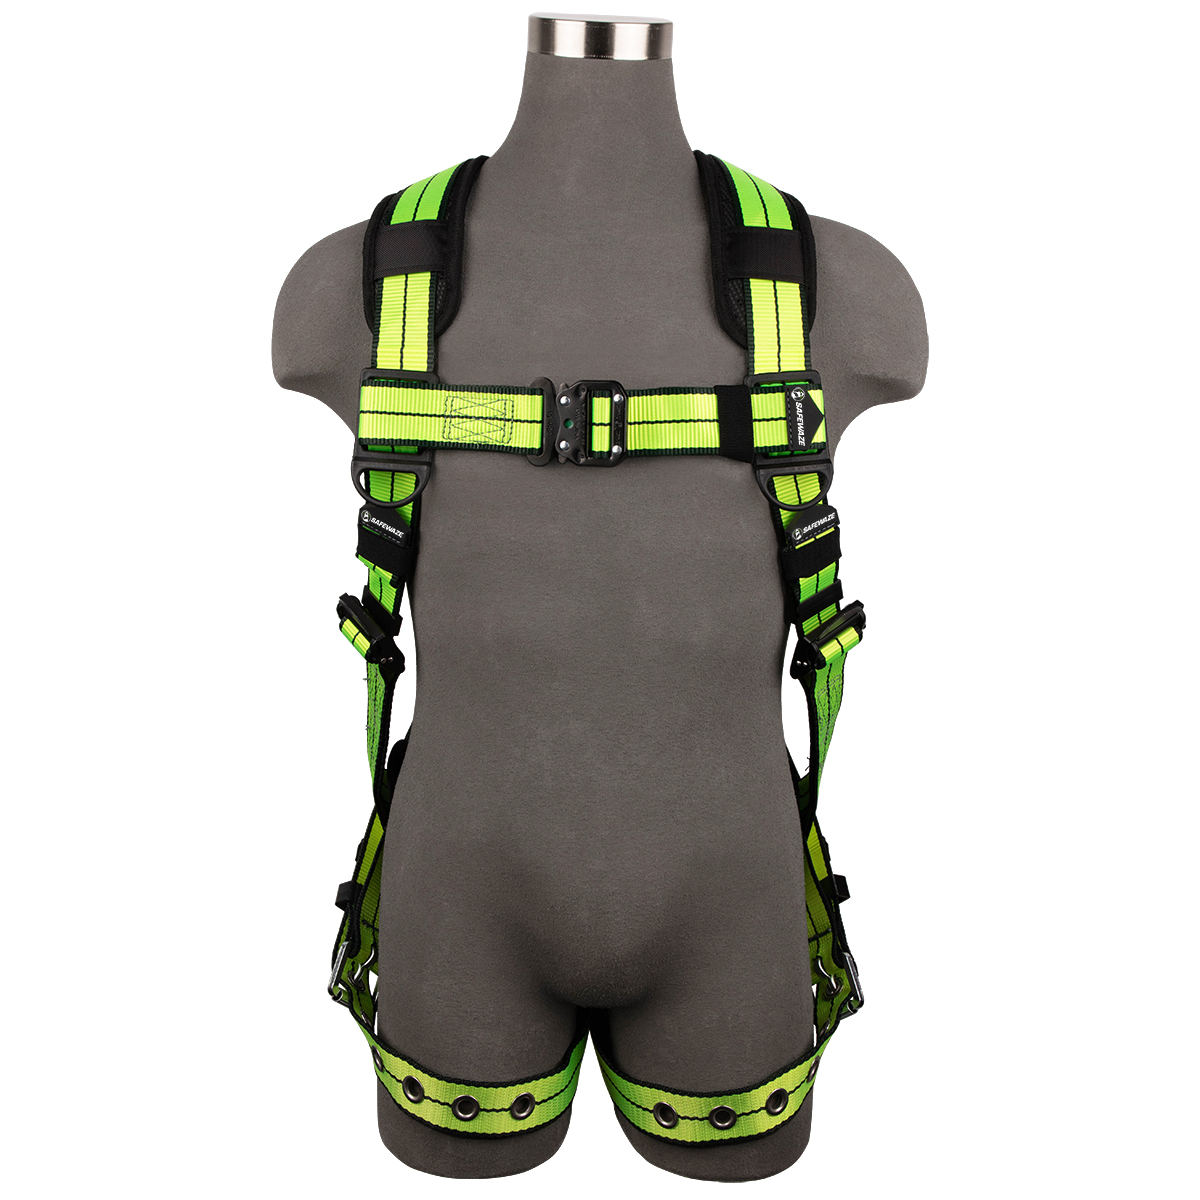 PRO Plus Full Body Harness: 1D, QC Chest, TB Legs - Fall Protection